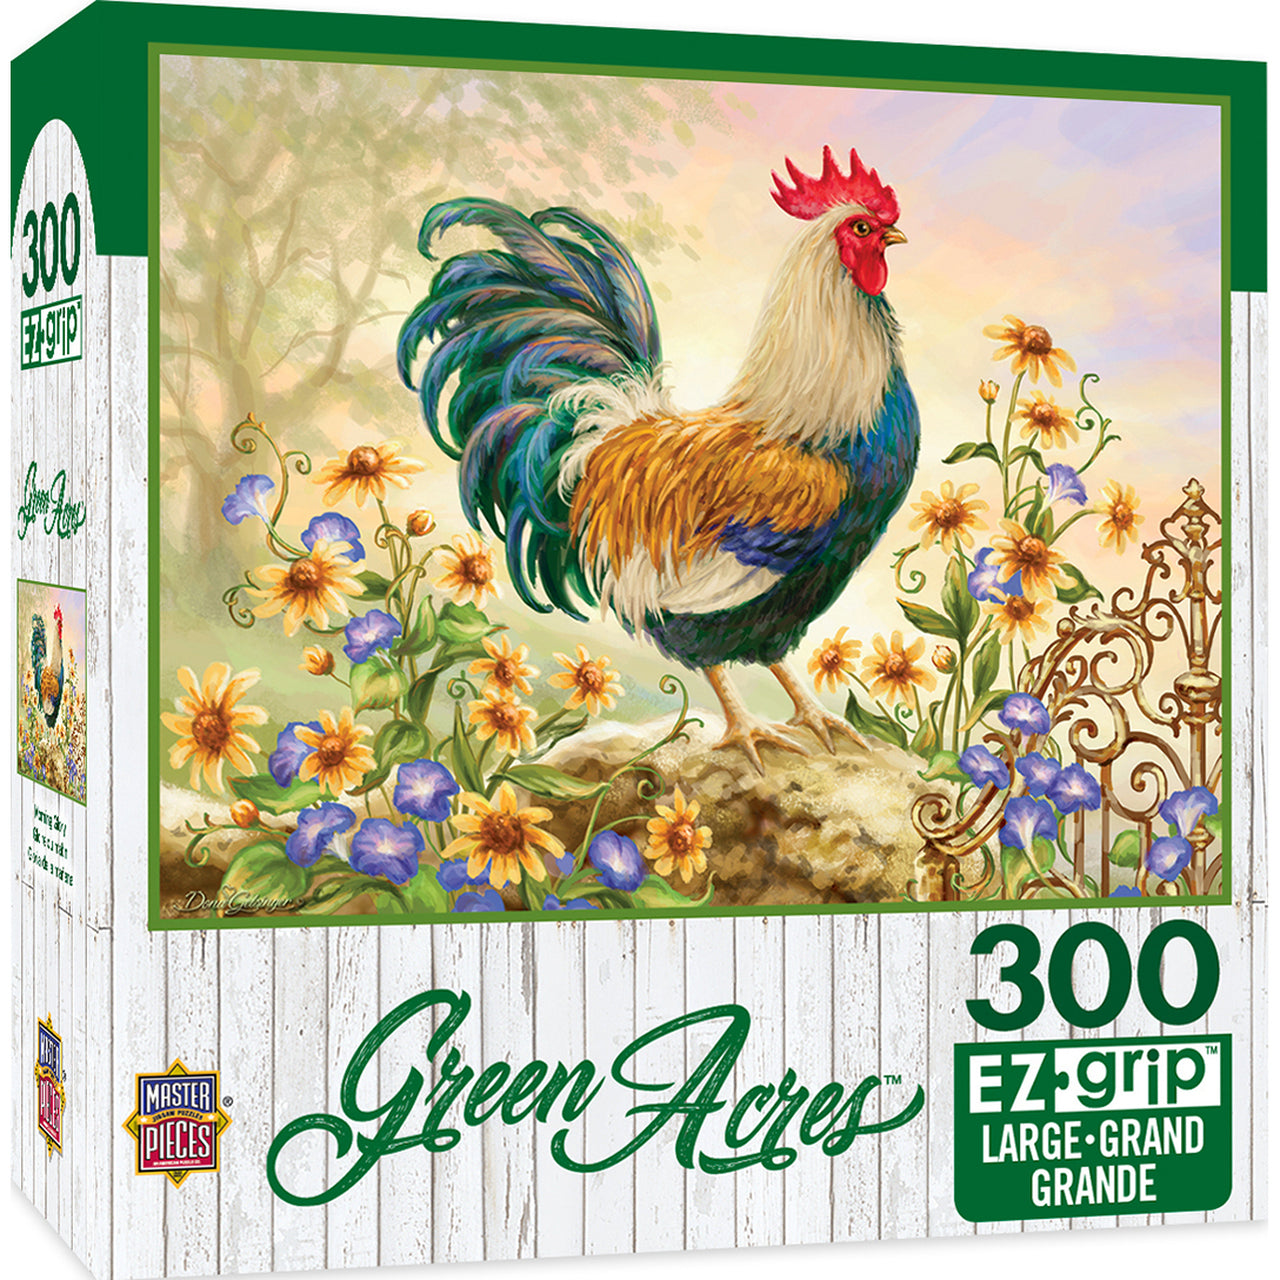 Green Acres Linen - Morning Glory Large 300 Piece EZGrip Jigsaw Puzzle by Masterpieces